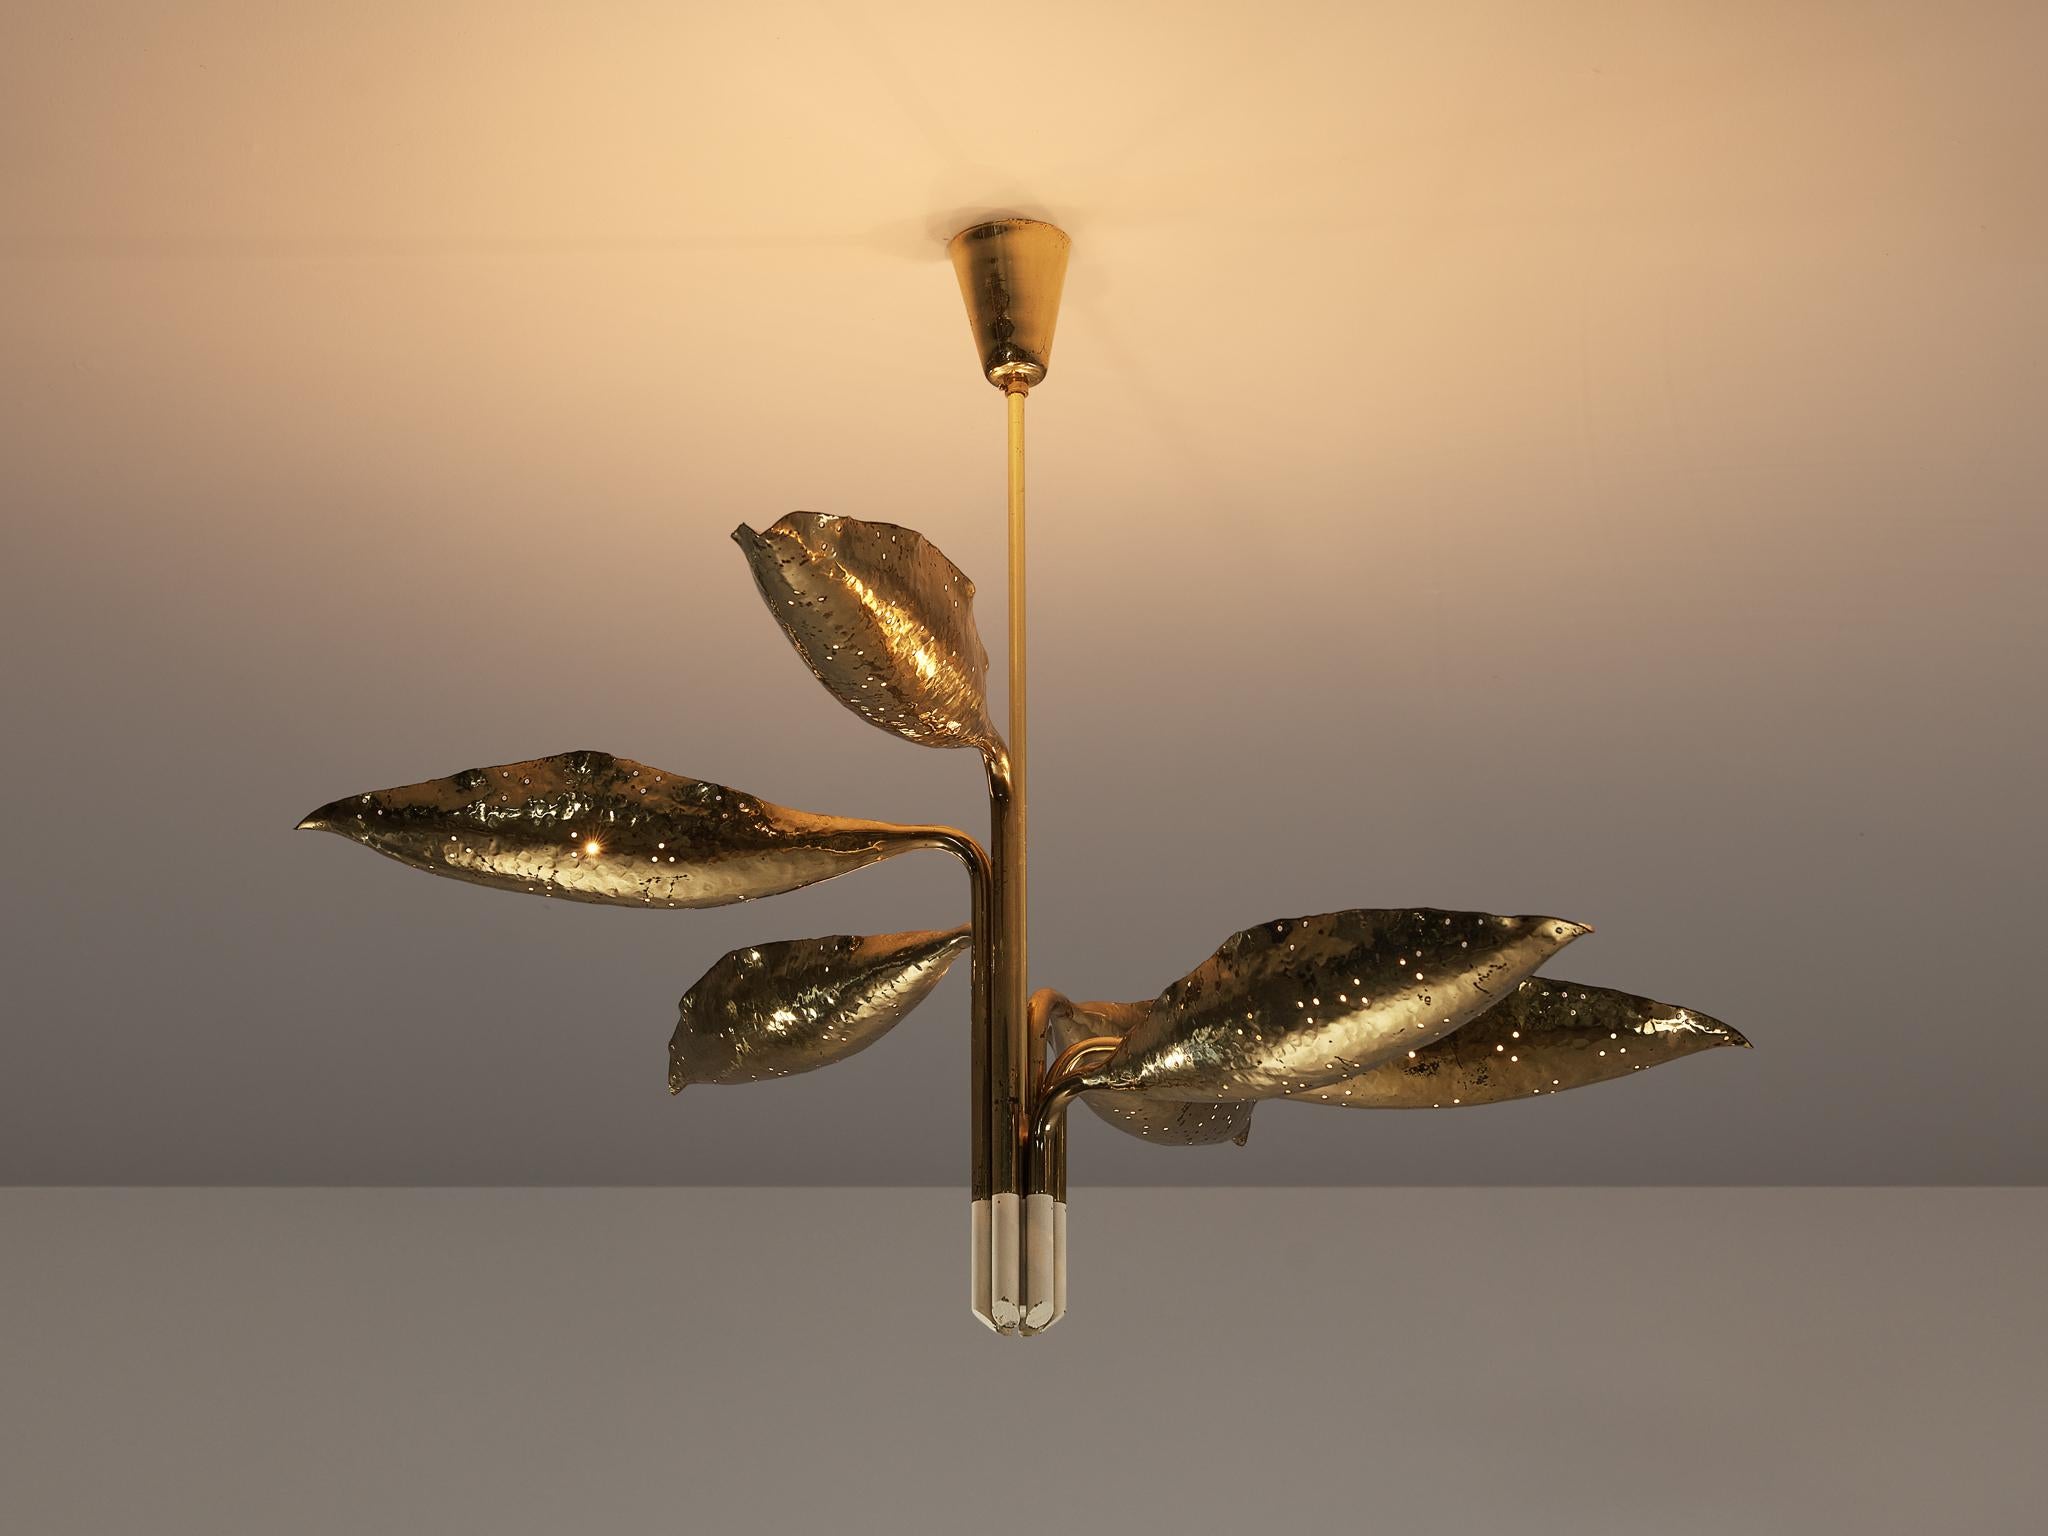 Angelo Lelii for Arredoluce, chandelier model 12369, brass, Italy, circa 1951

Organic chandelier by Angelo Lelii designed for Arredoluce. Six leaves open towards the ceiling and surround the lightbulbs. The hammered, perforated brass has a vivid